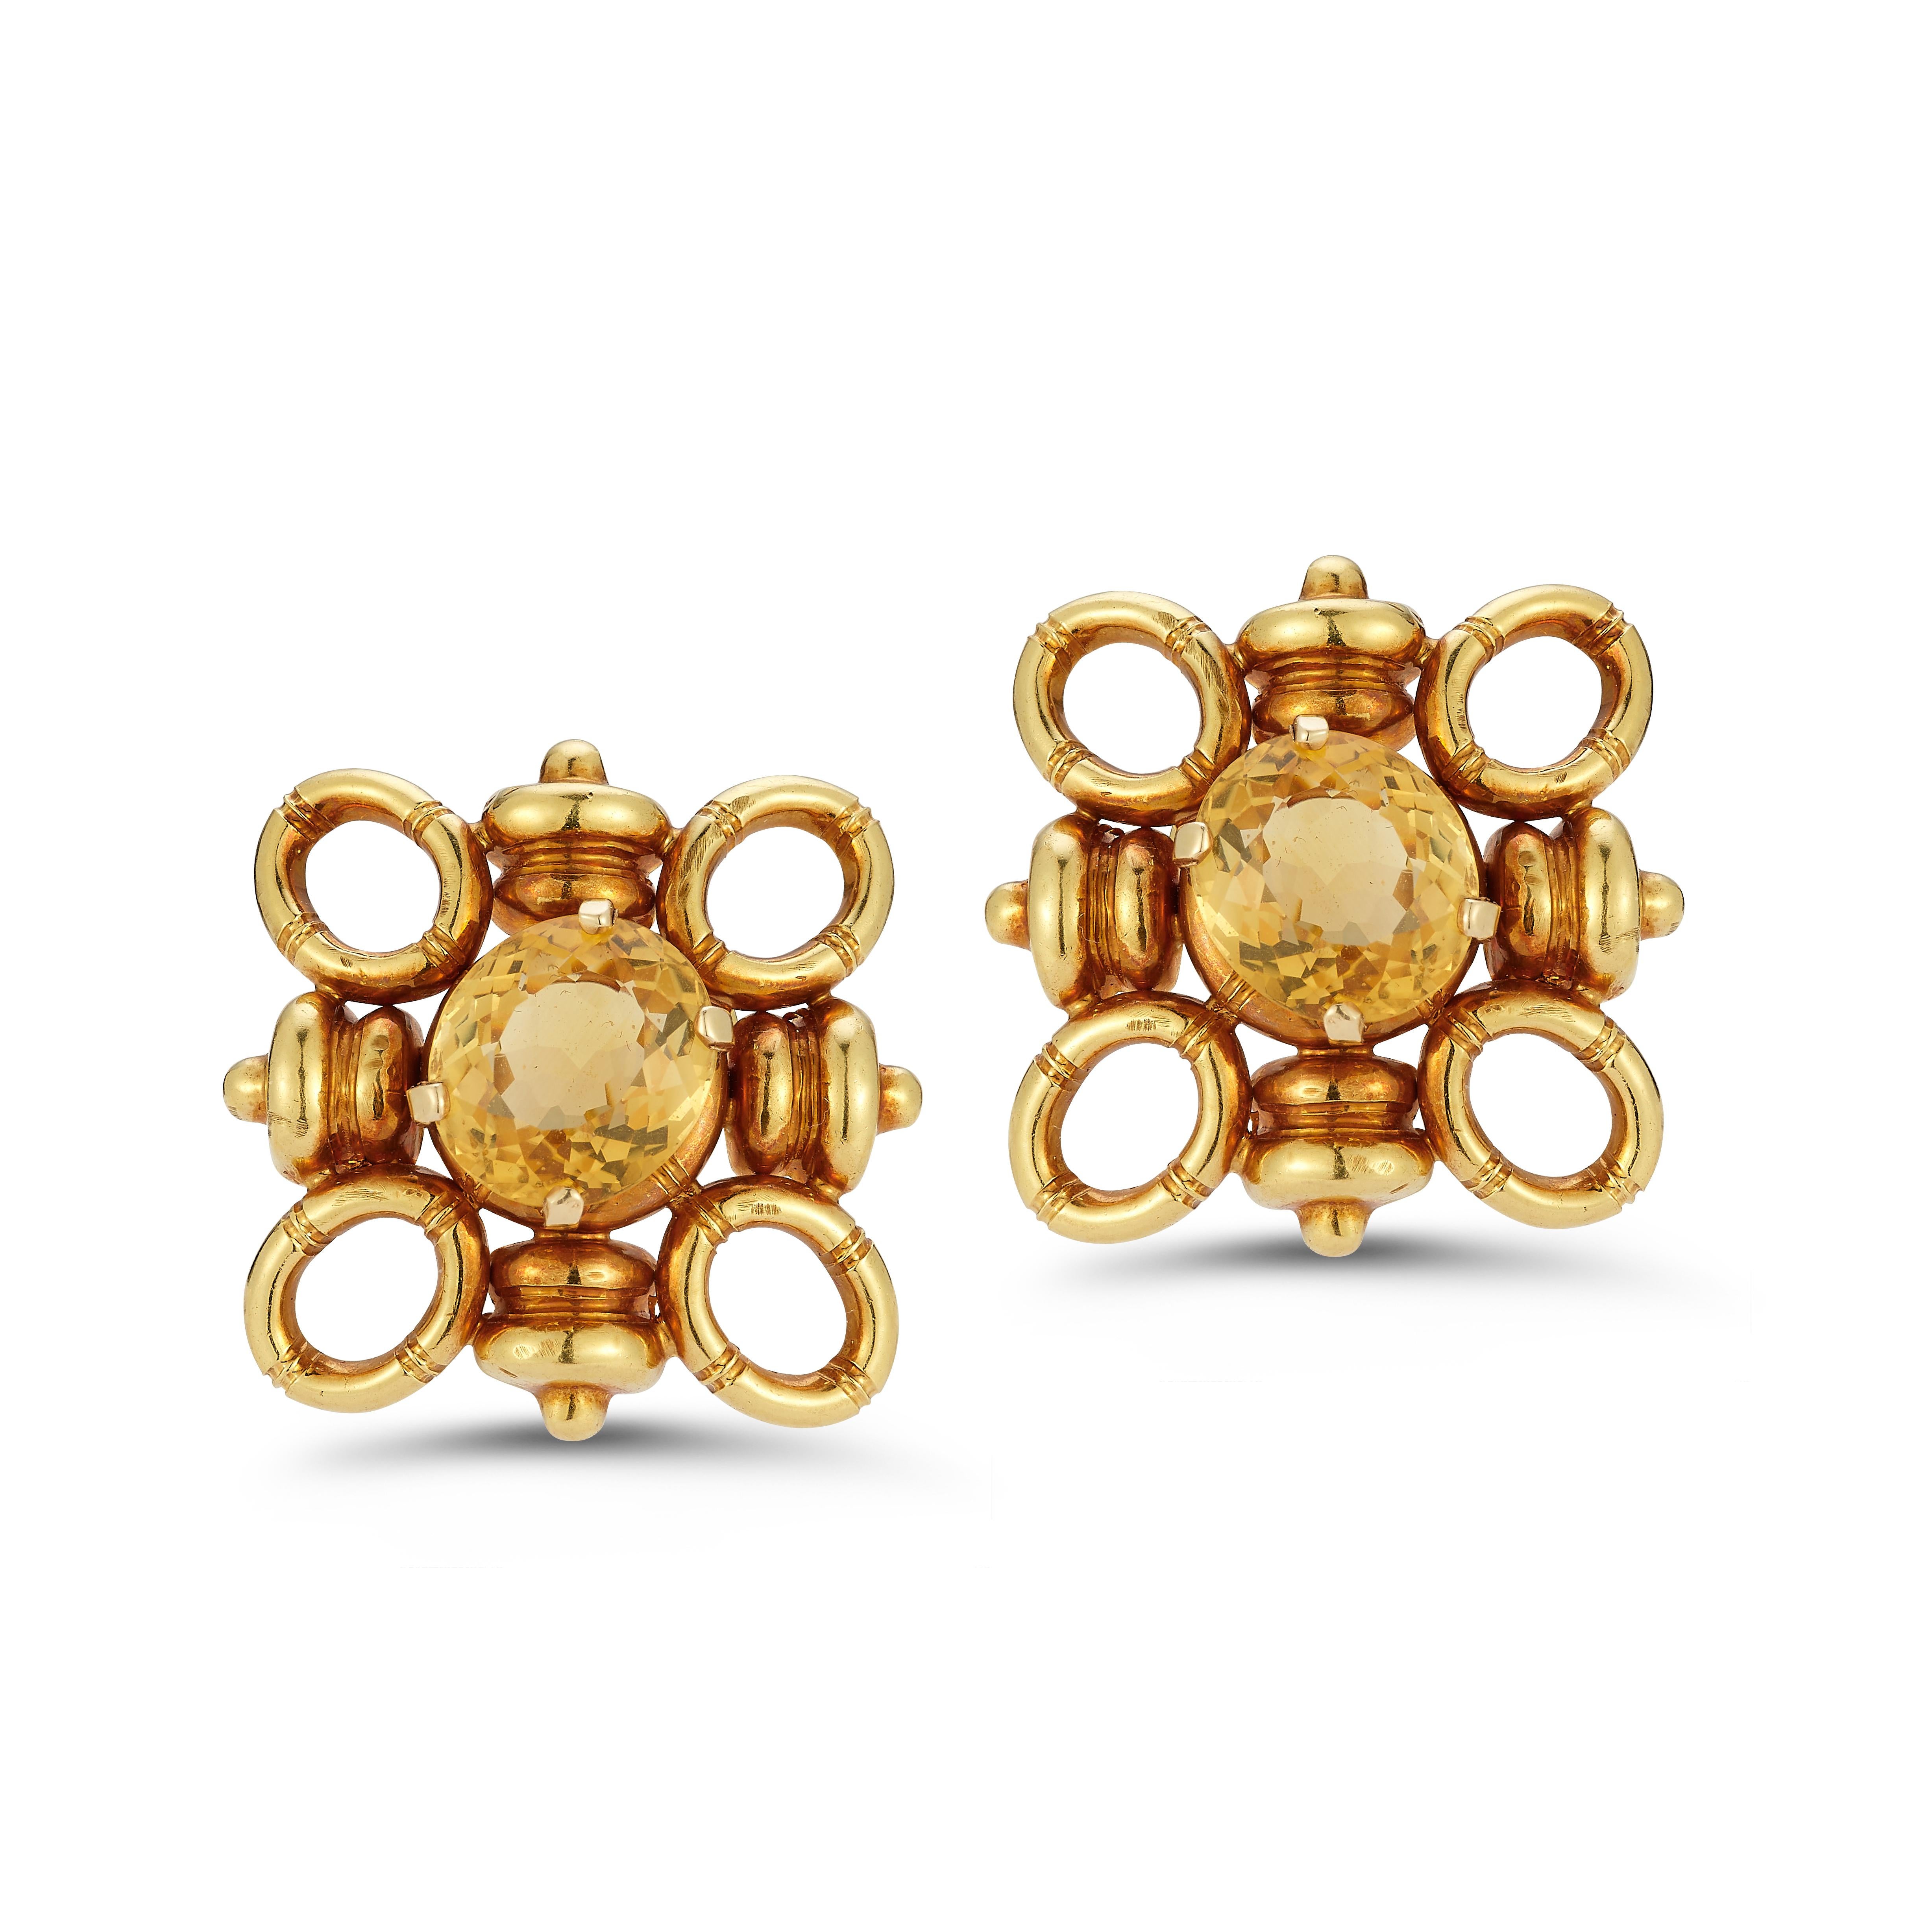 Tiffany and Co Retro Citrine Earrings

A pair of oval cut citrines surrounded by a quatrefoil motif  18k yellow gold setting.

Measurements: 1